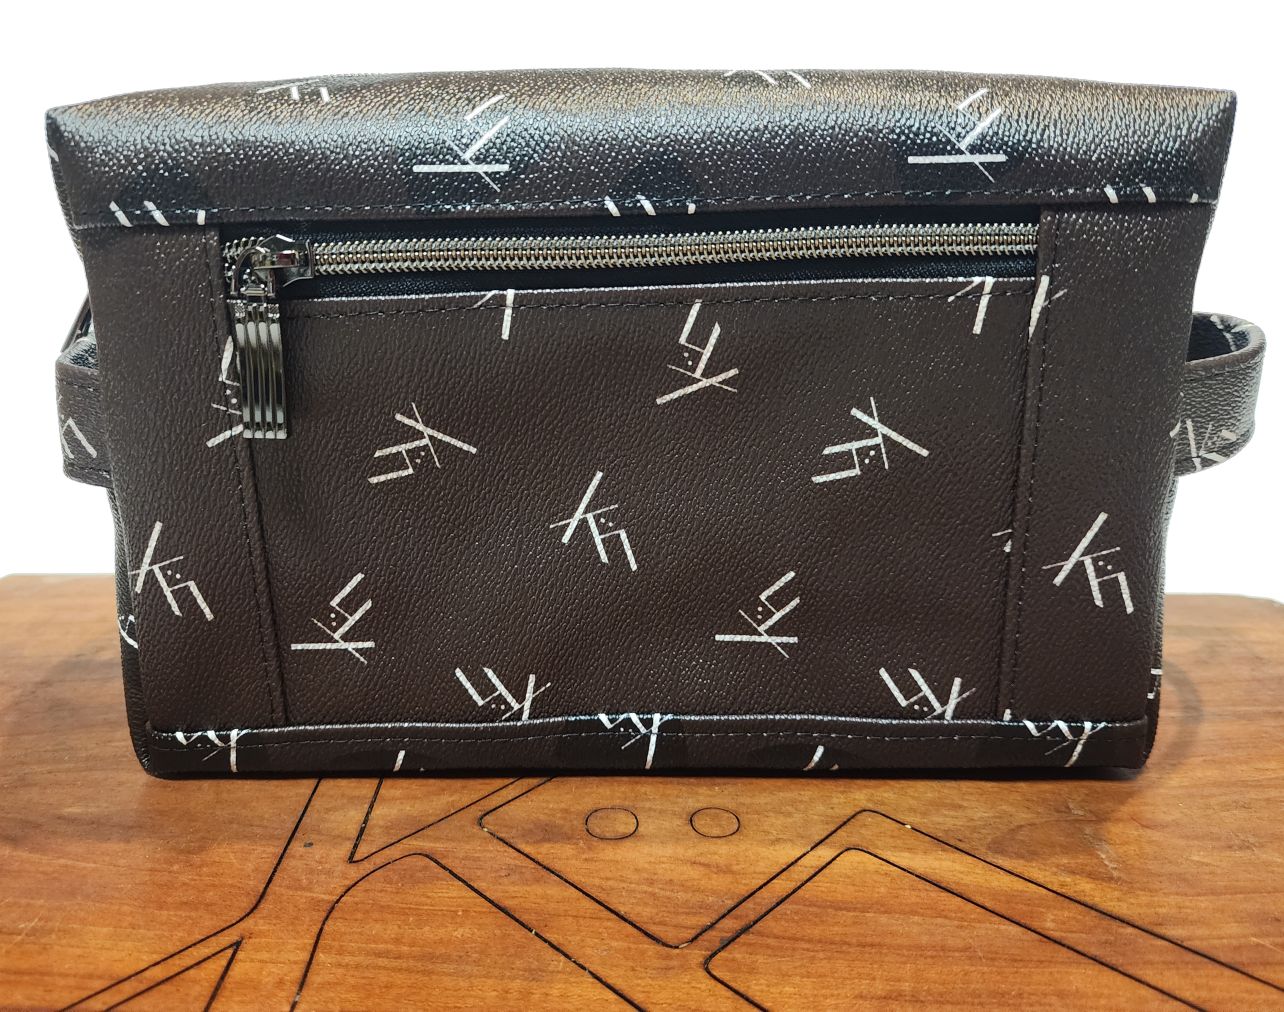 Toiletry bag dopp kit from kühn products dark brown with white logo.